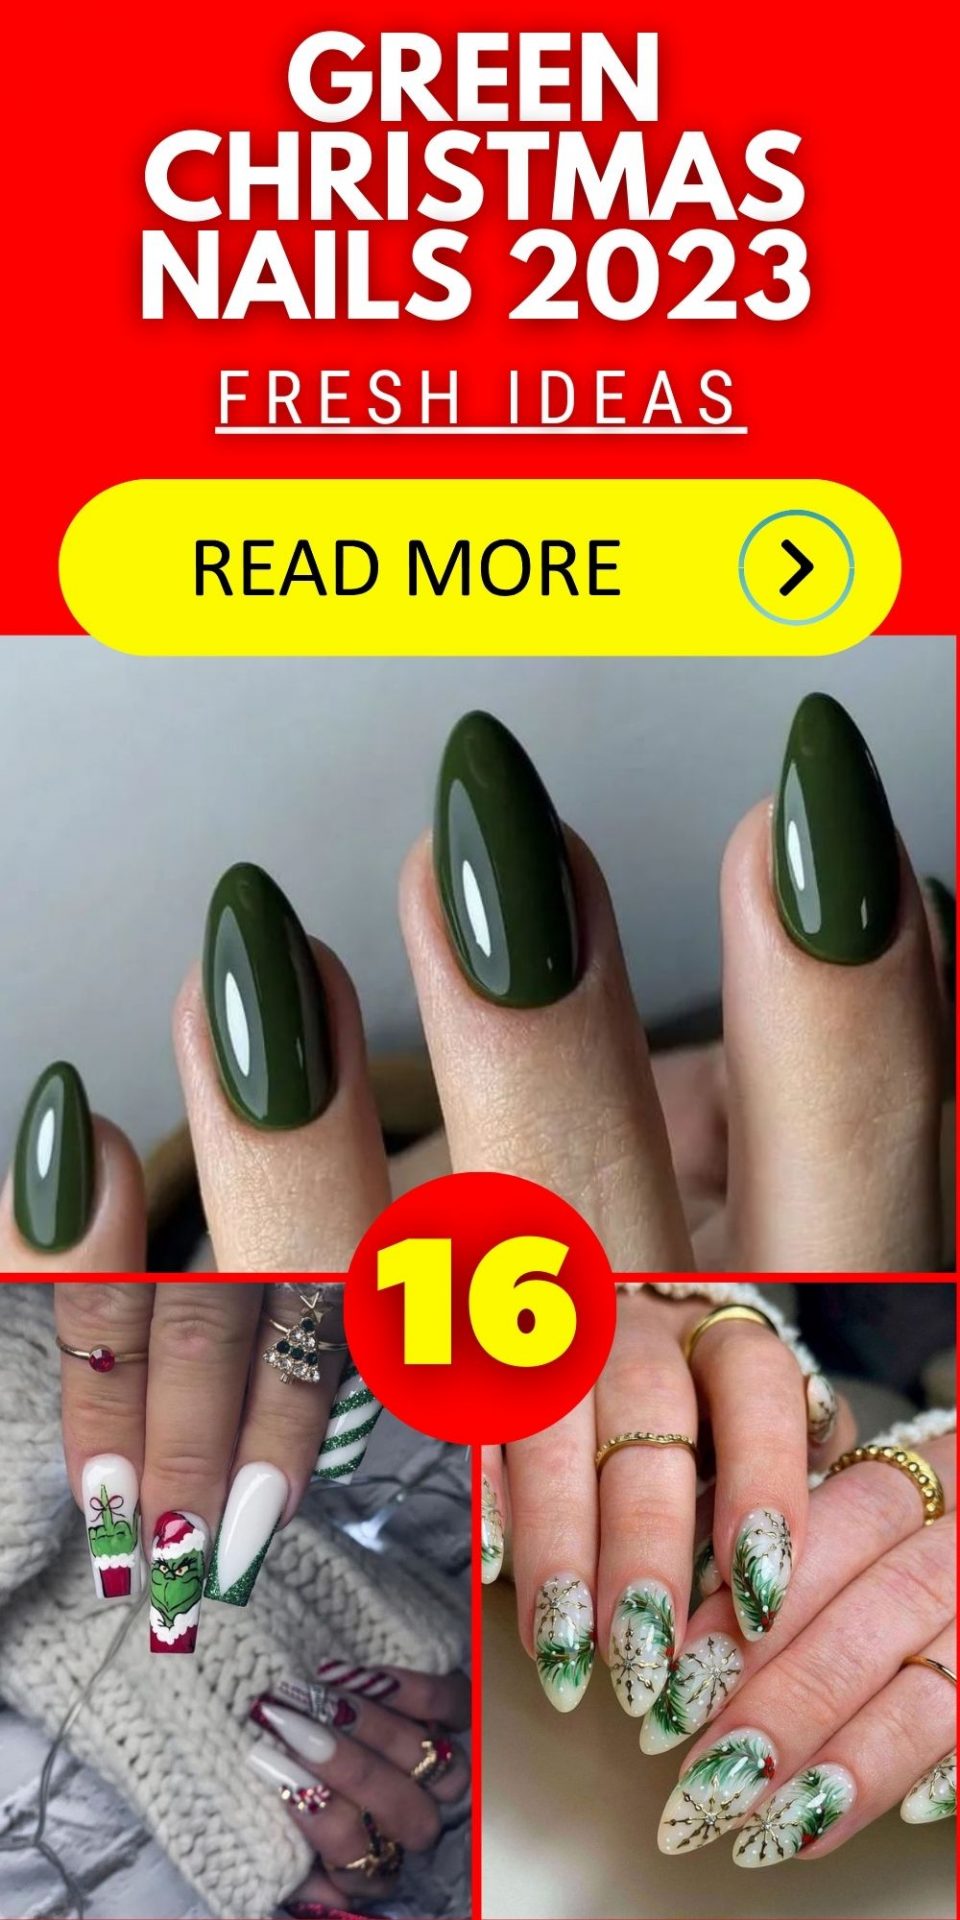 Green Christmas Nails 2023 16 Ideas: Get Festive with These Creative ...